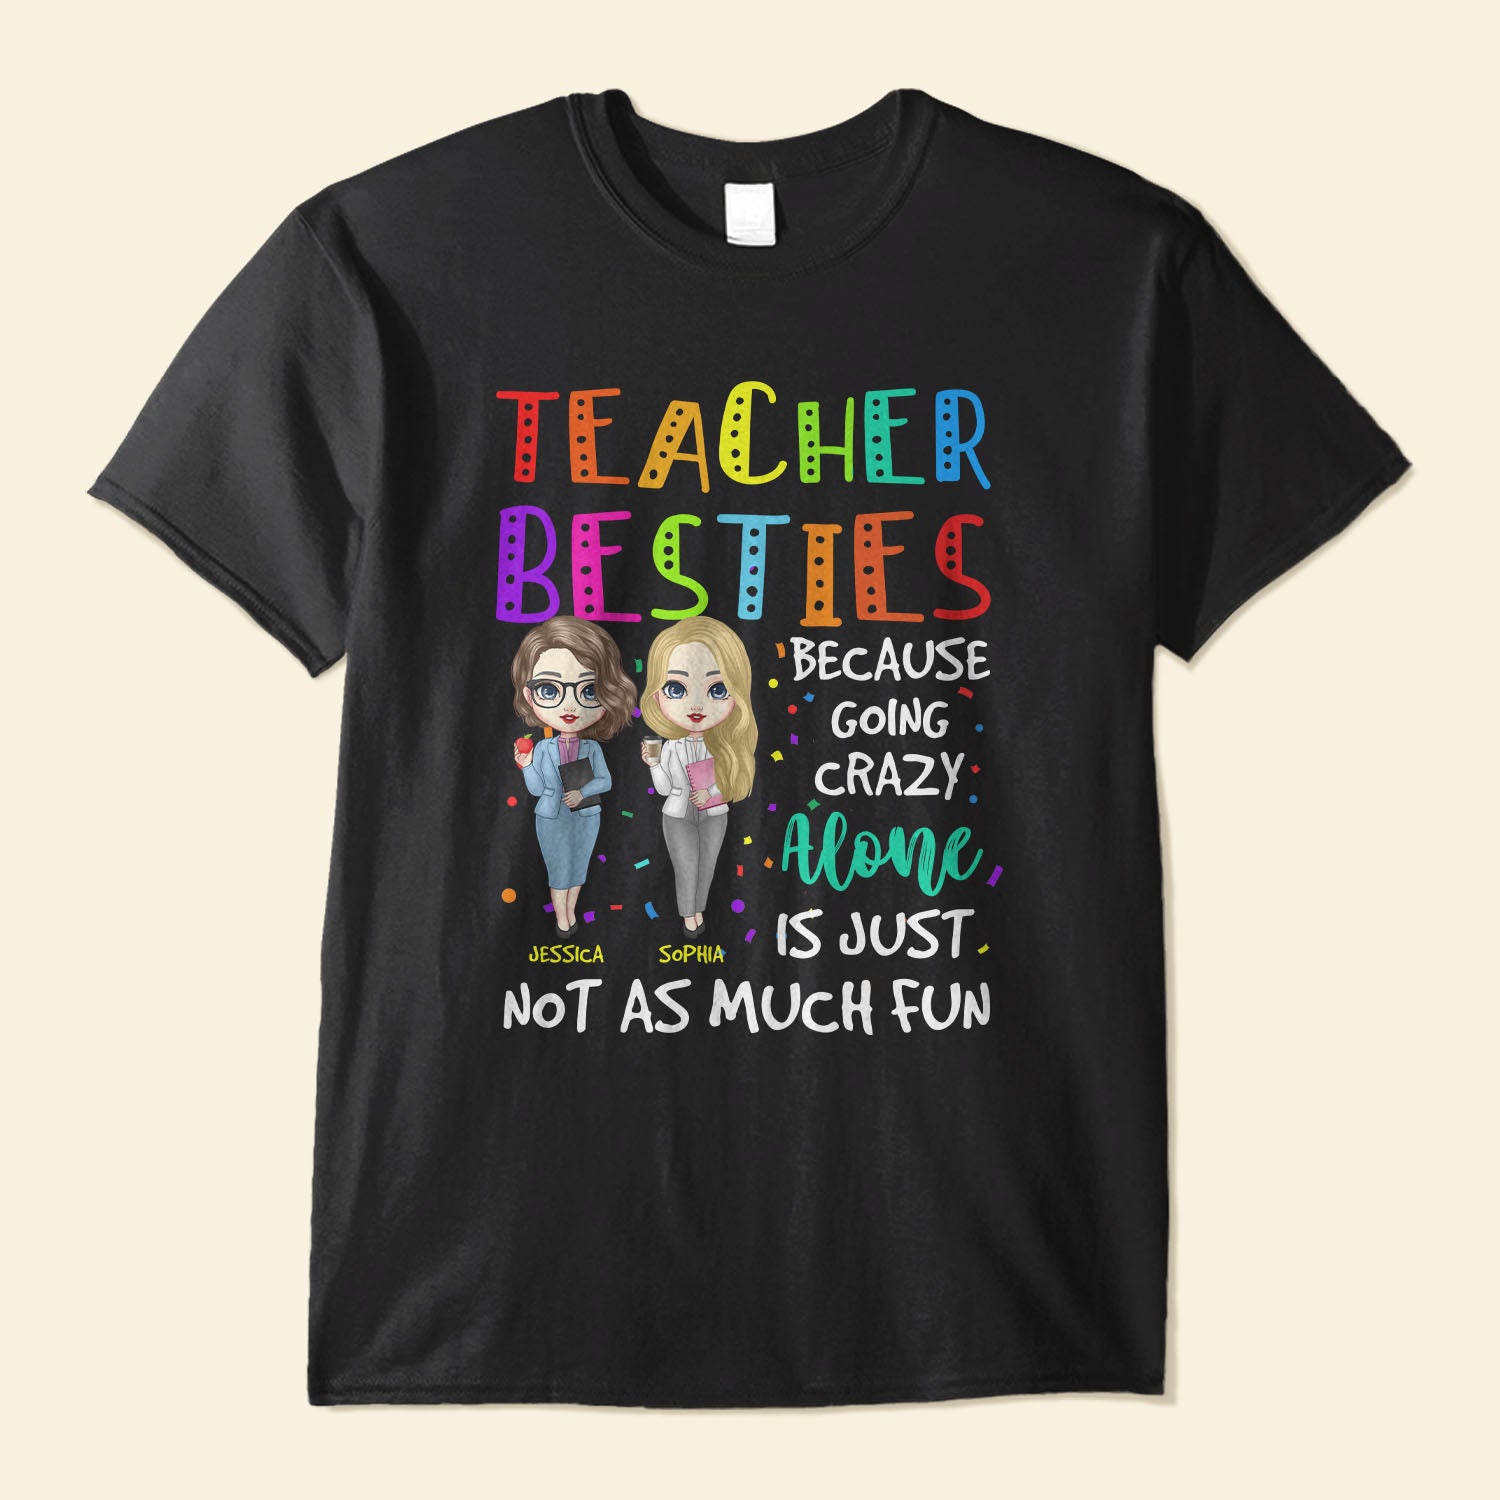 Teacher Besties Because Going Crazy Alone Is Not Fun - Personalized Shirt - Birthday Back To School Gift, Leaving Gift For Teachers, Coworkers, Colleagues, Besties